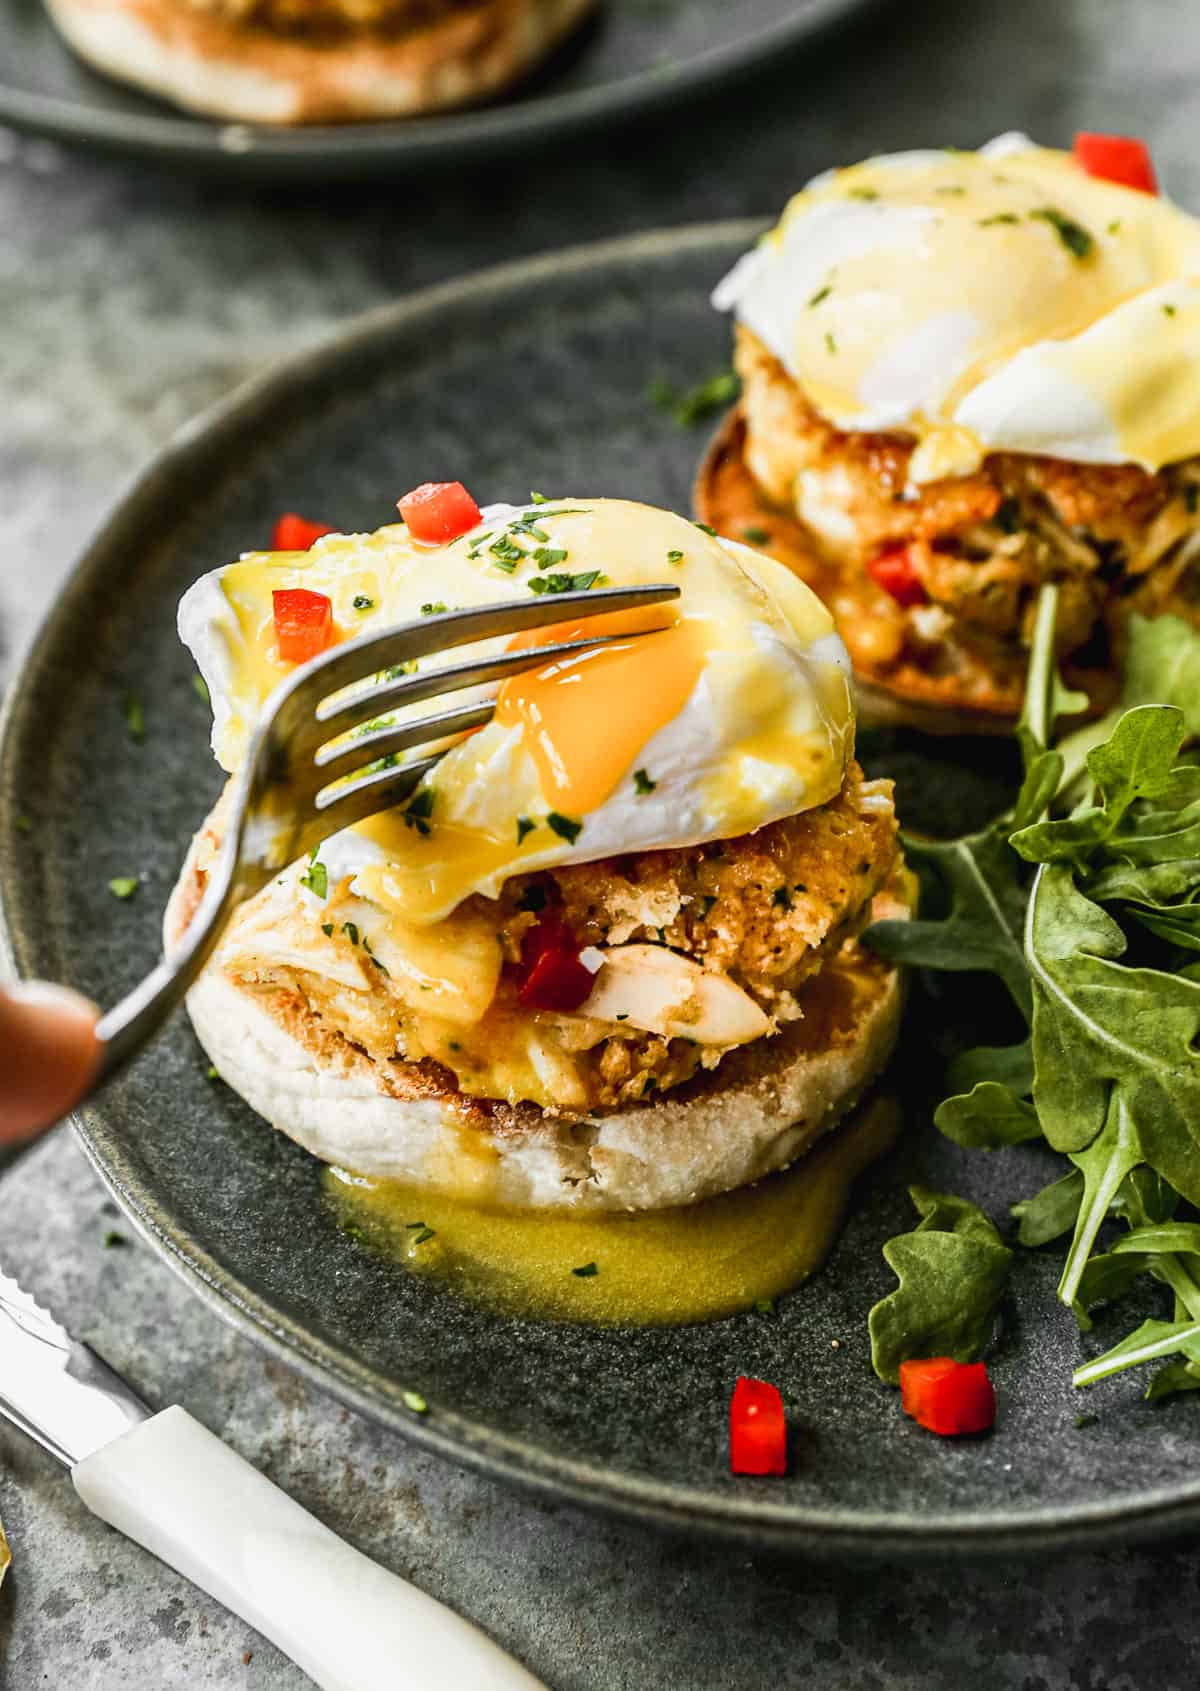 Crab Cake Benedict being cut into with a fork on a plate next to some greens.